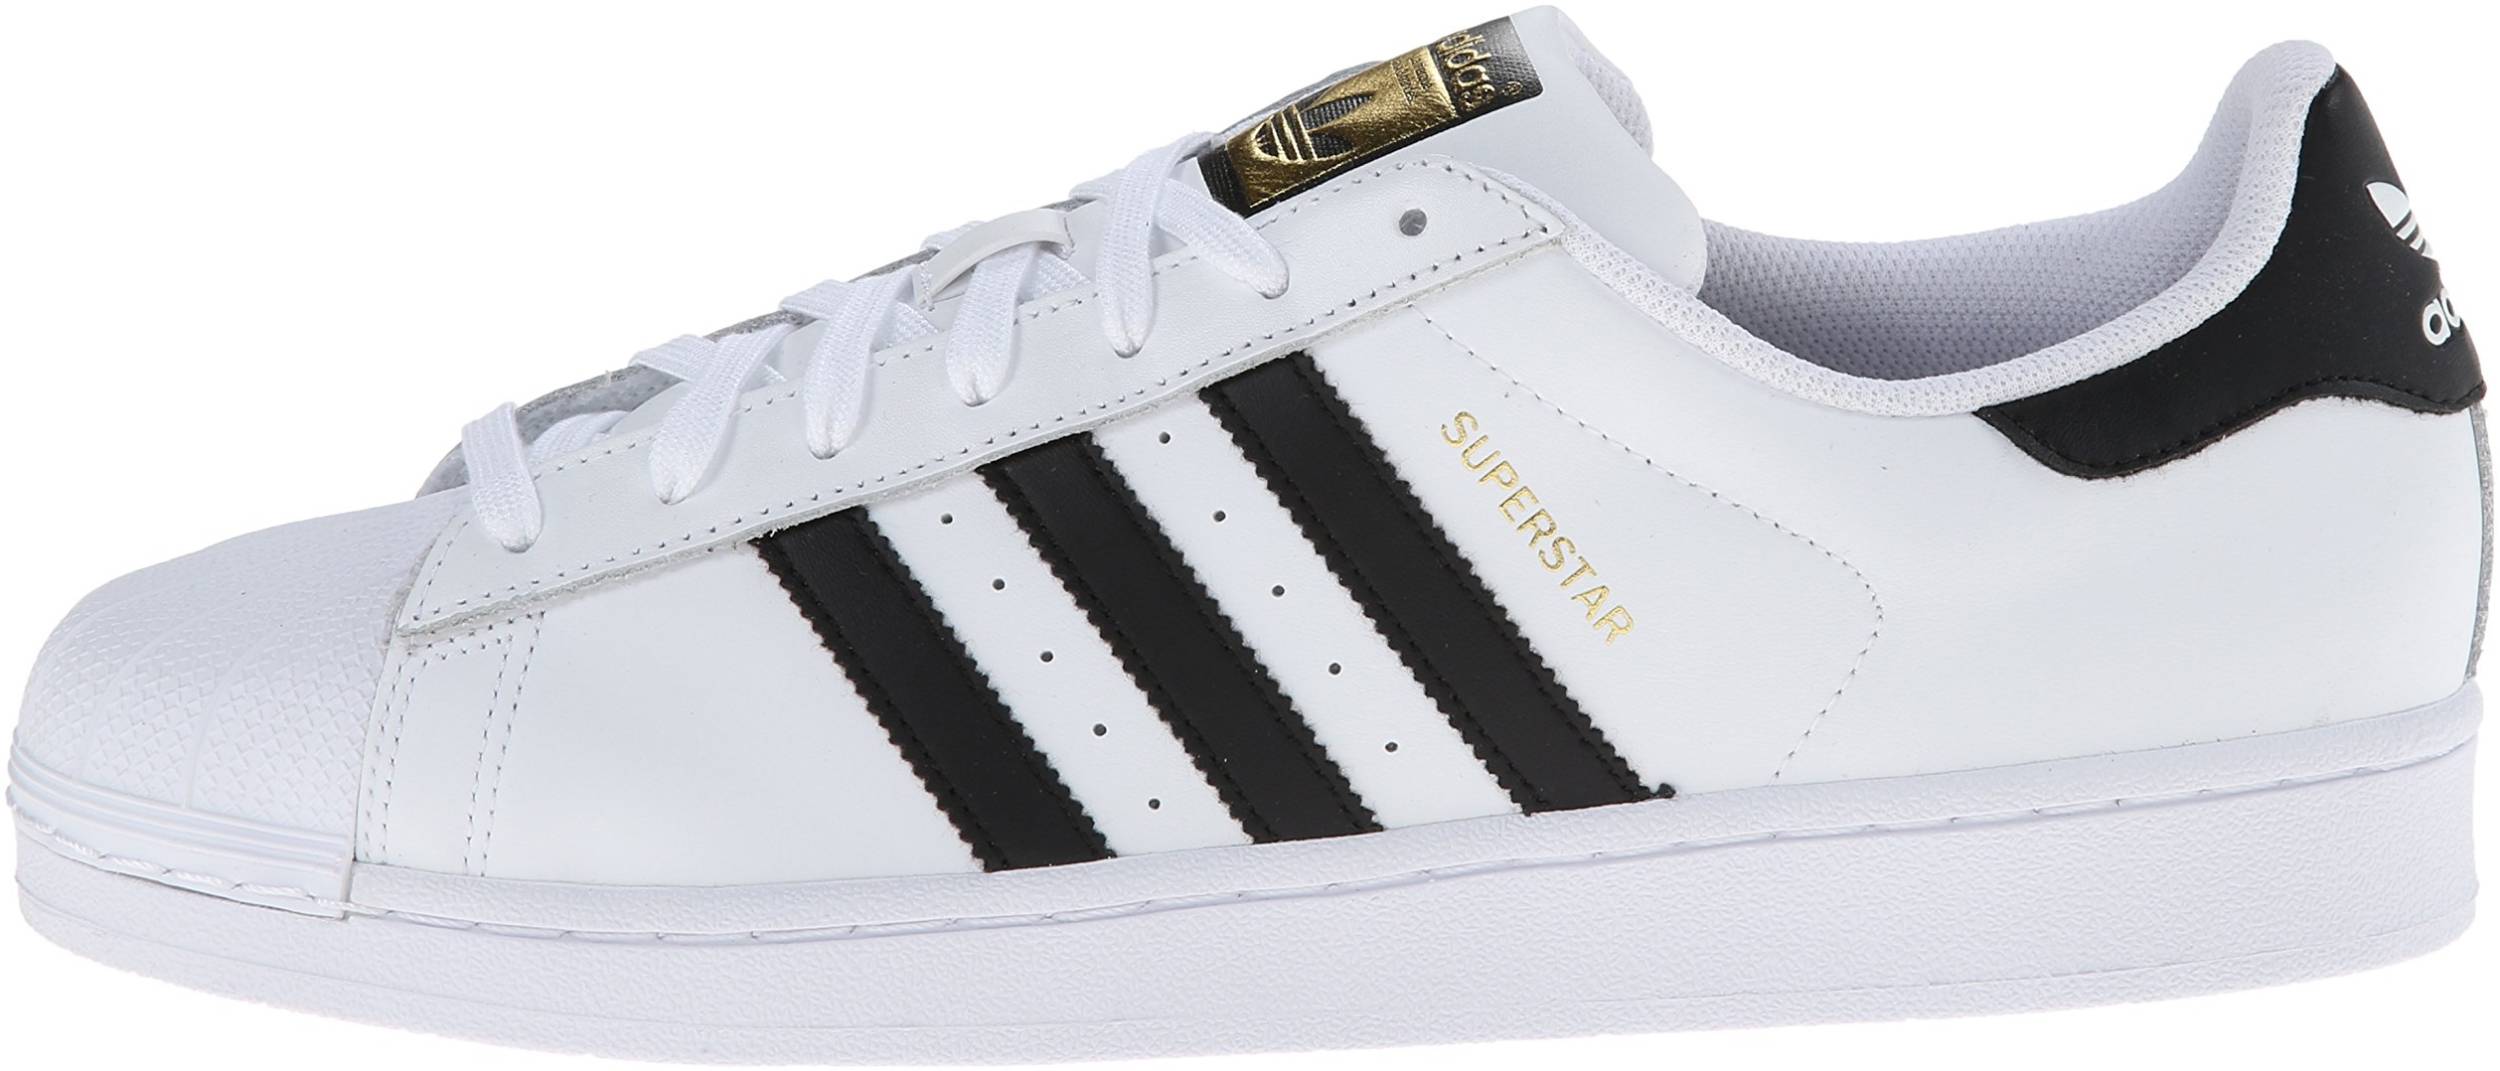 50+ colors of Adidas Superstar (from $30) | RunRepeat